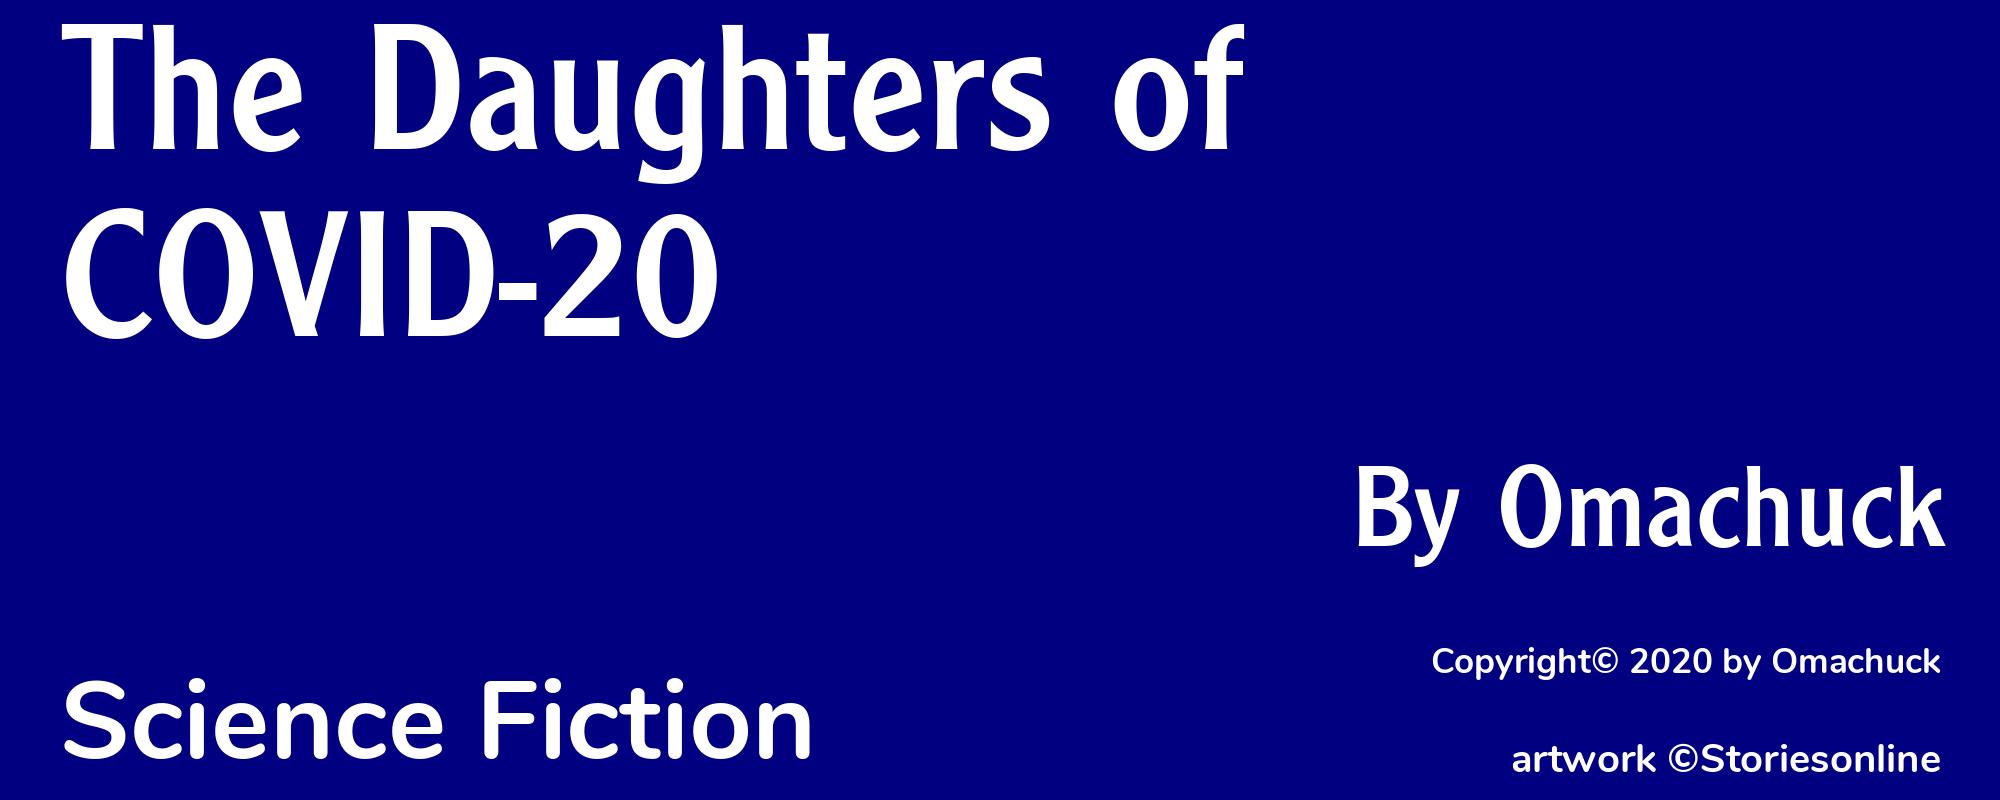 The Daughters of COVID-20 - Cover